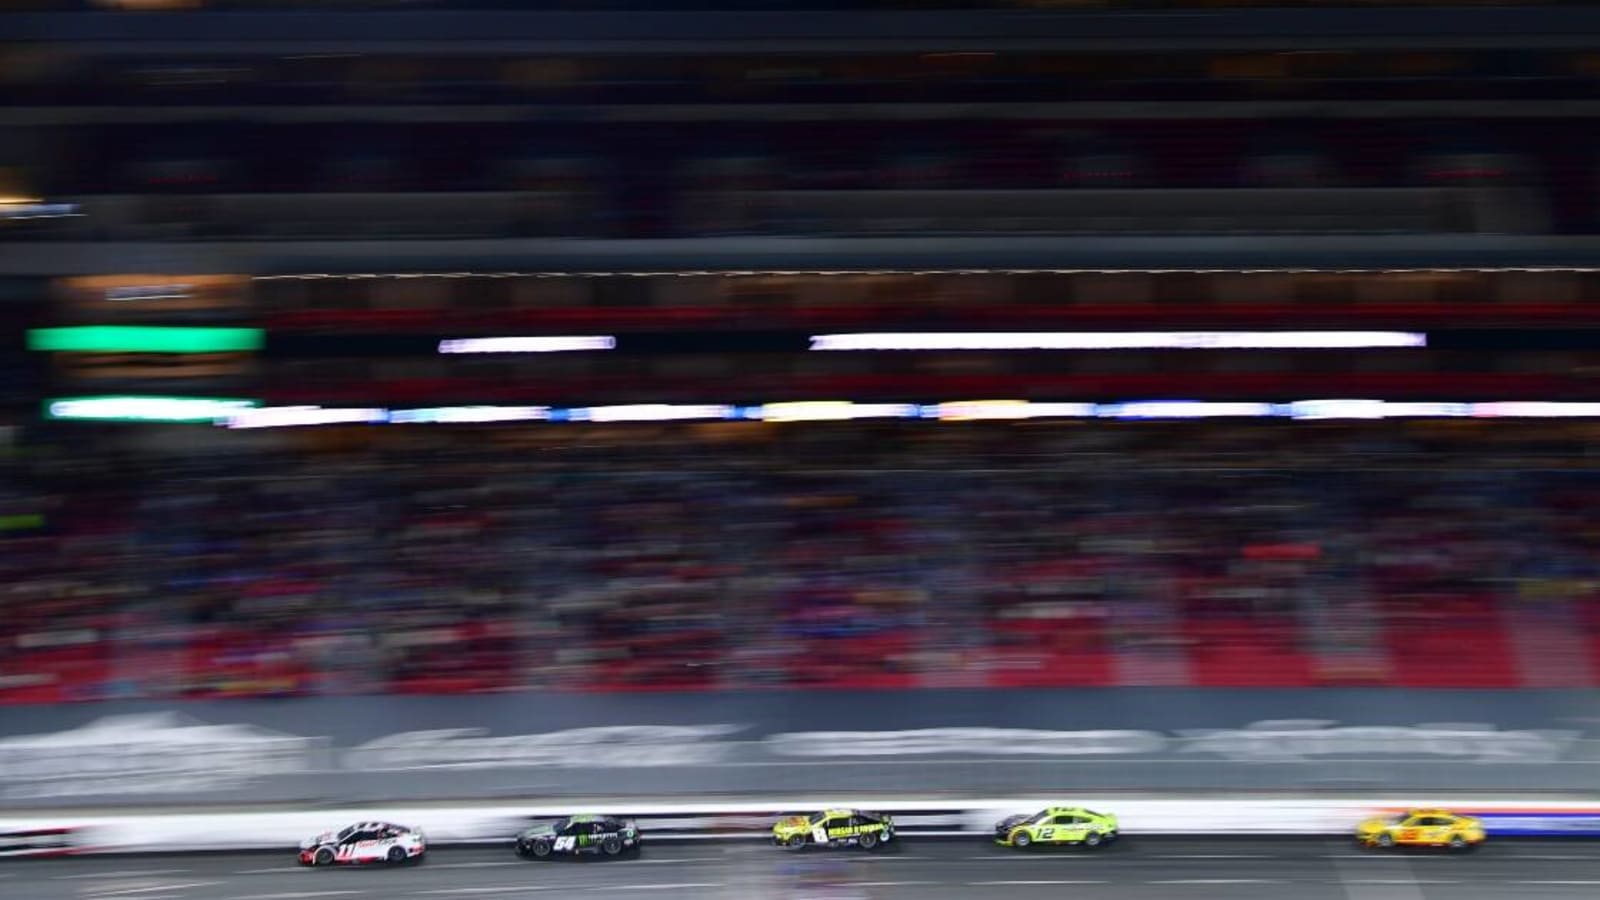 Bubba Wallace gets spun around by Kyle Larson before finish line at Busch Light Clash